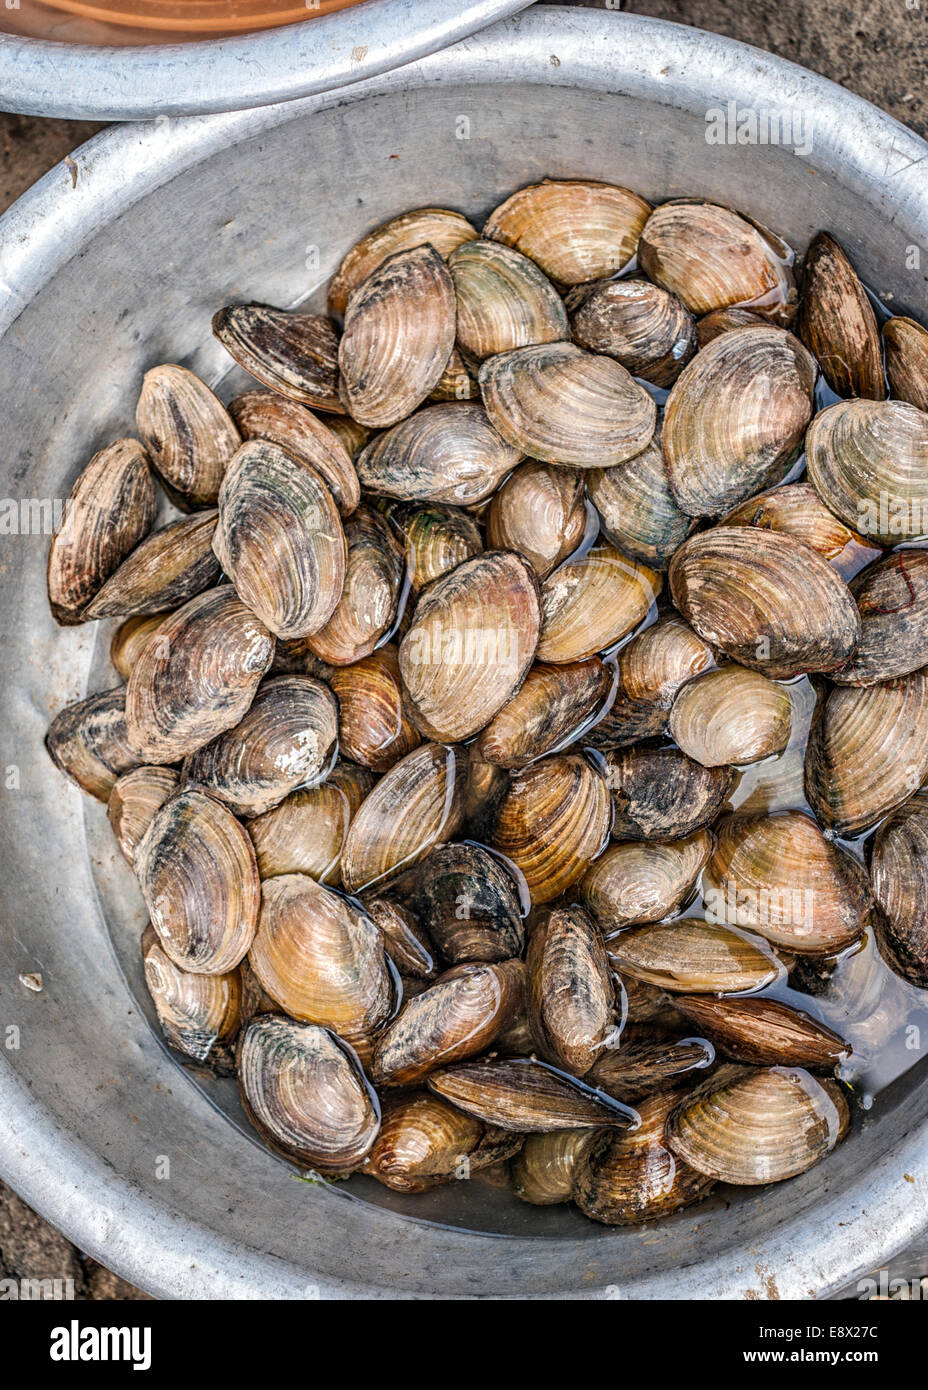 Basin of clams on the market. Stock Photo